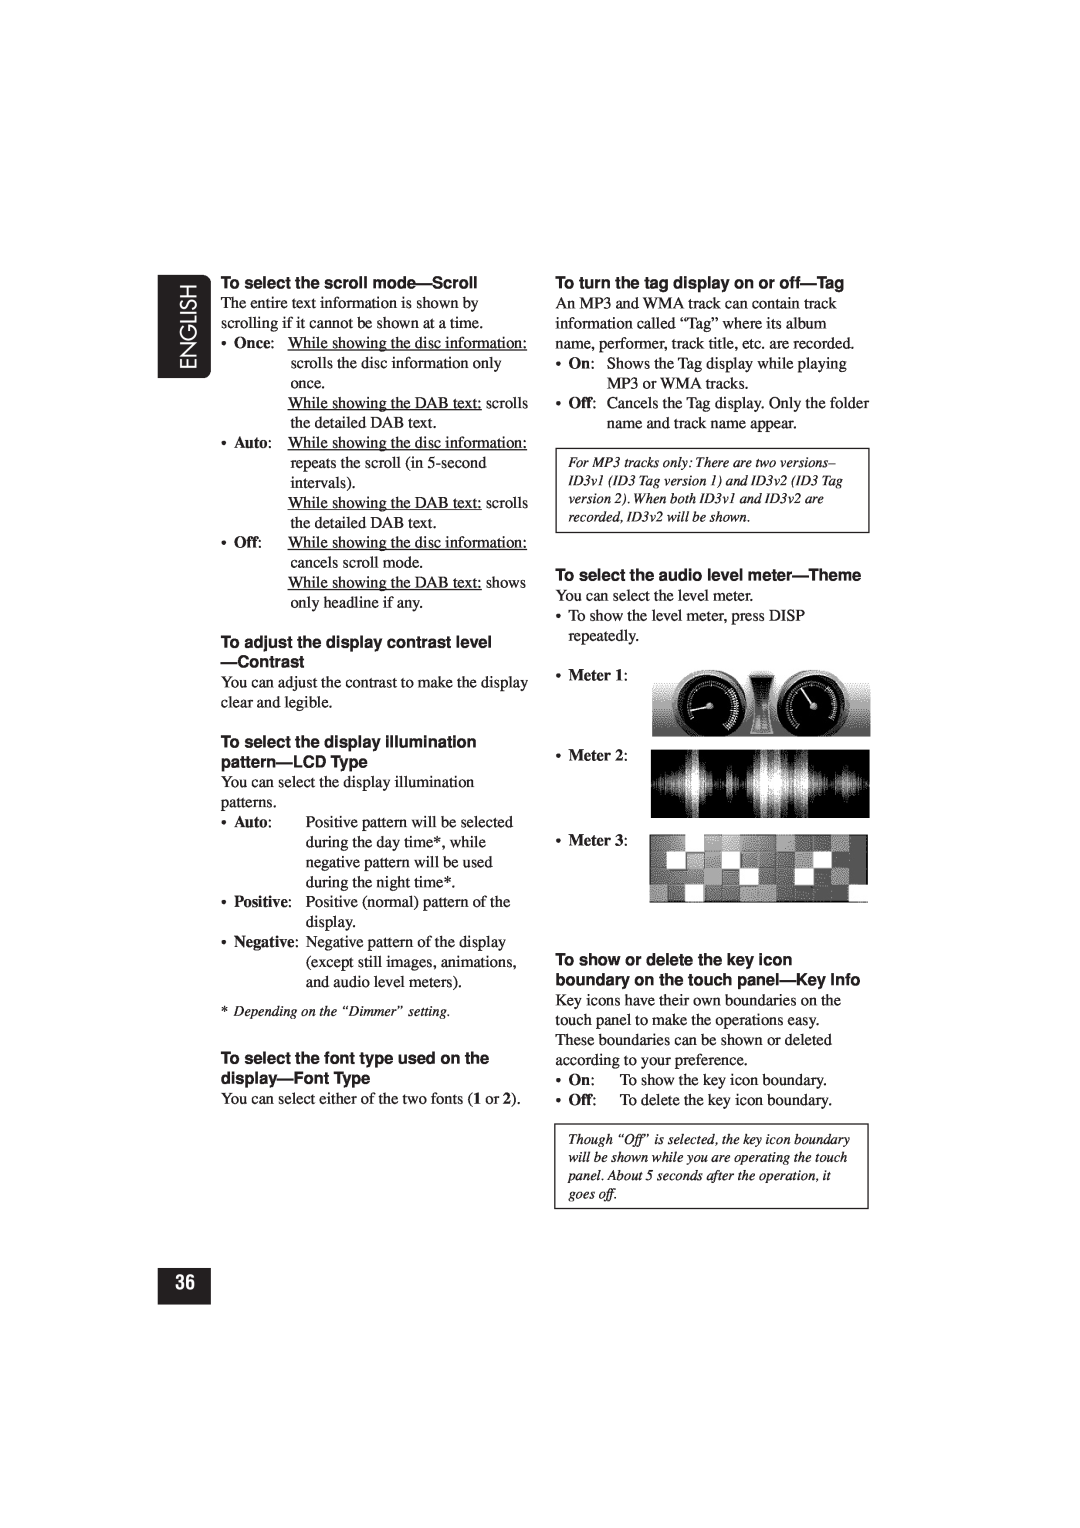 JVC KD-LHX502, KD-LHX501 manual English, To select the scroll mode—Scroll, To adjust the display contrast level —Contrast 